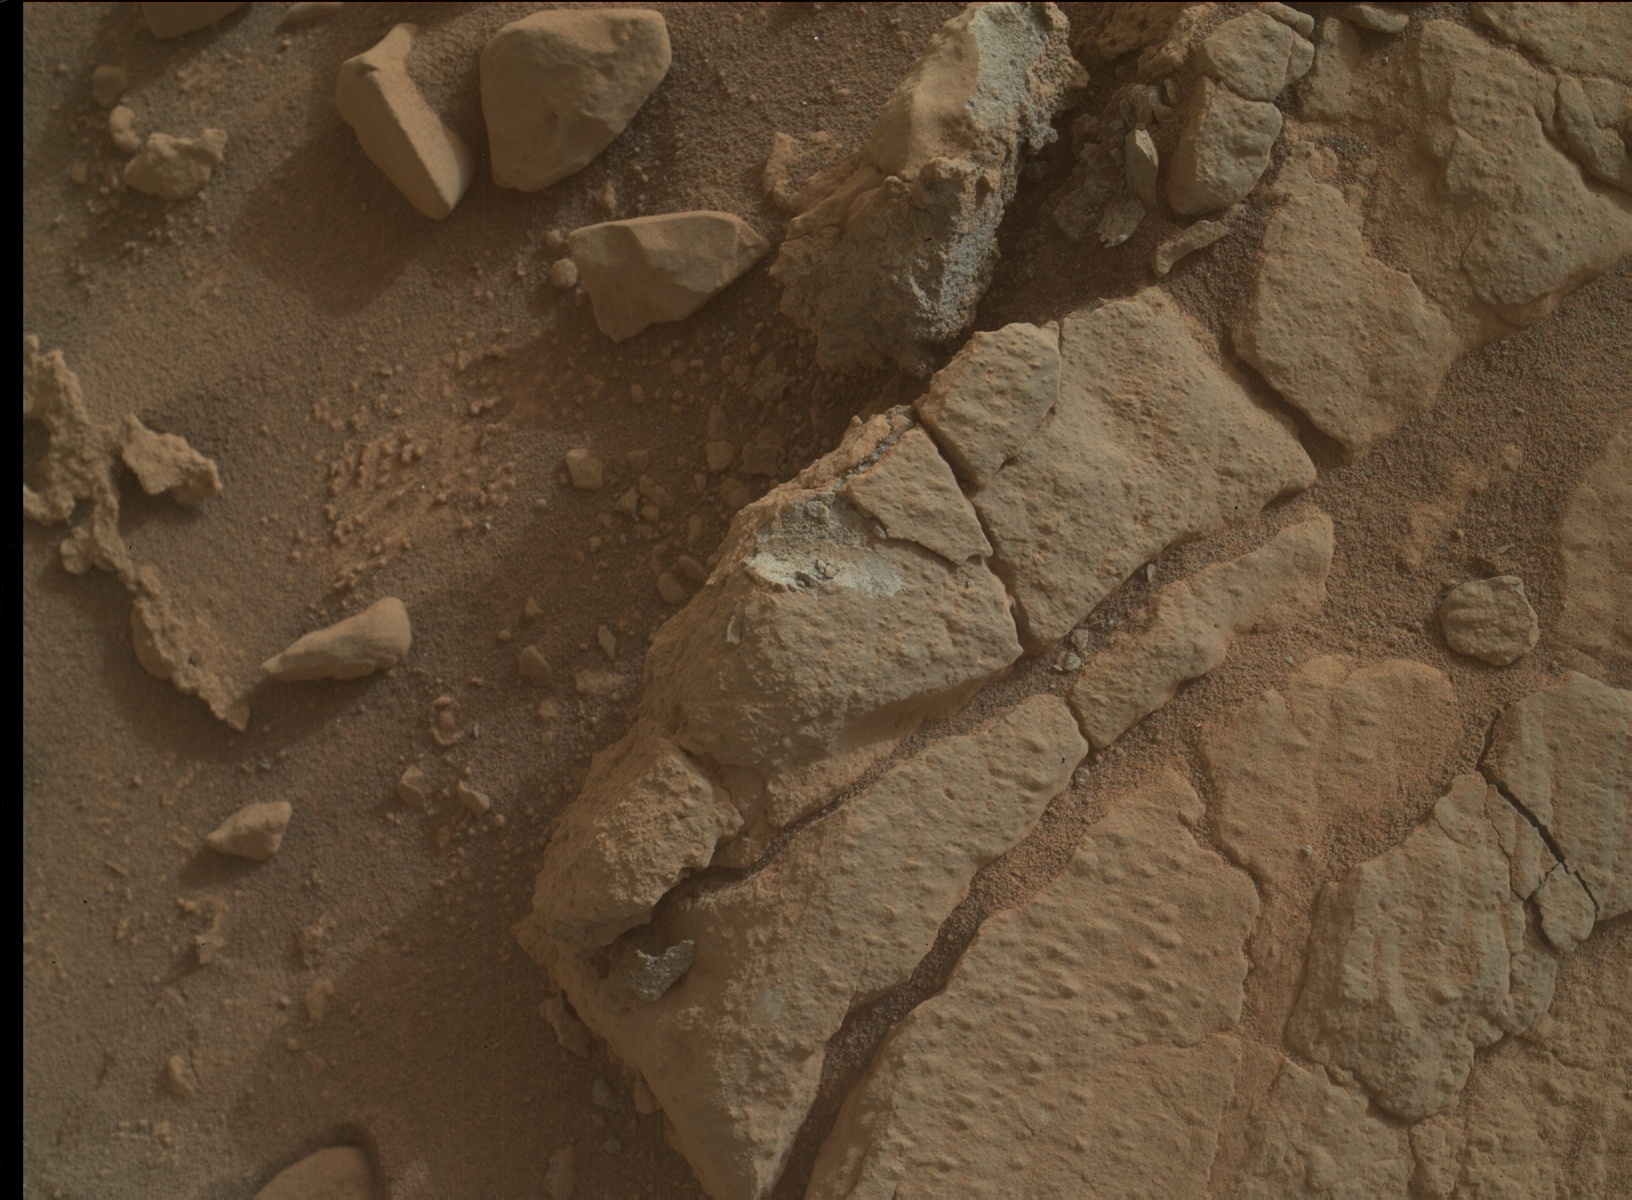 Nasa's Mars rover Curiosity acquired this image using its Mars Hand Lens Imager (MAHLI) on Sol 3451